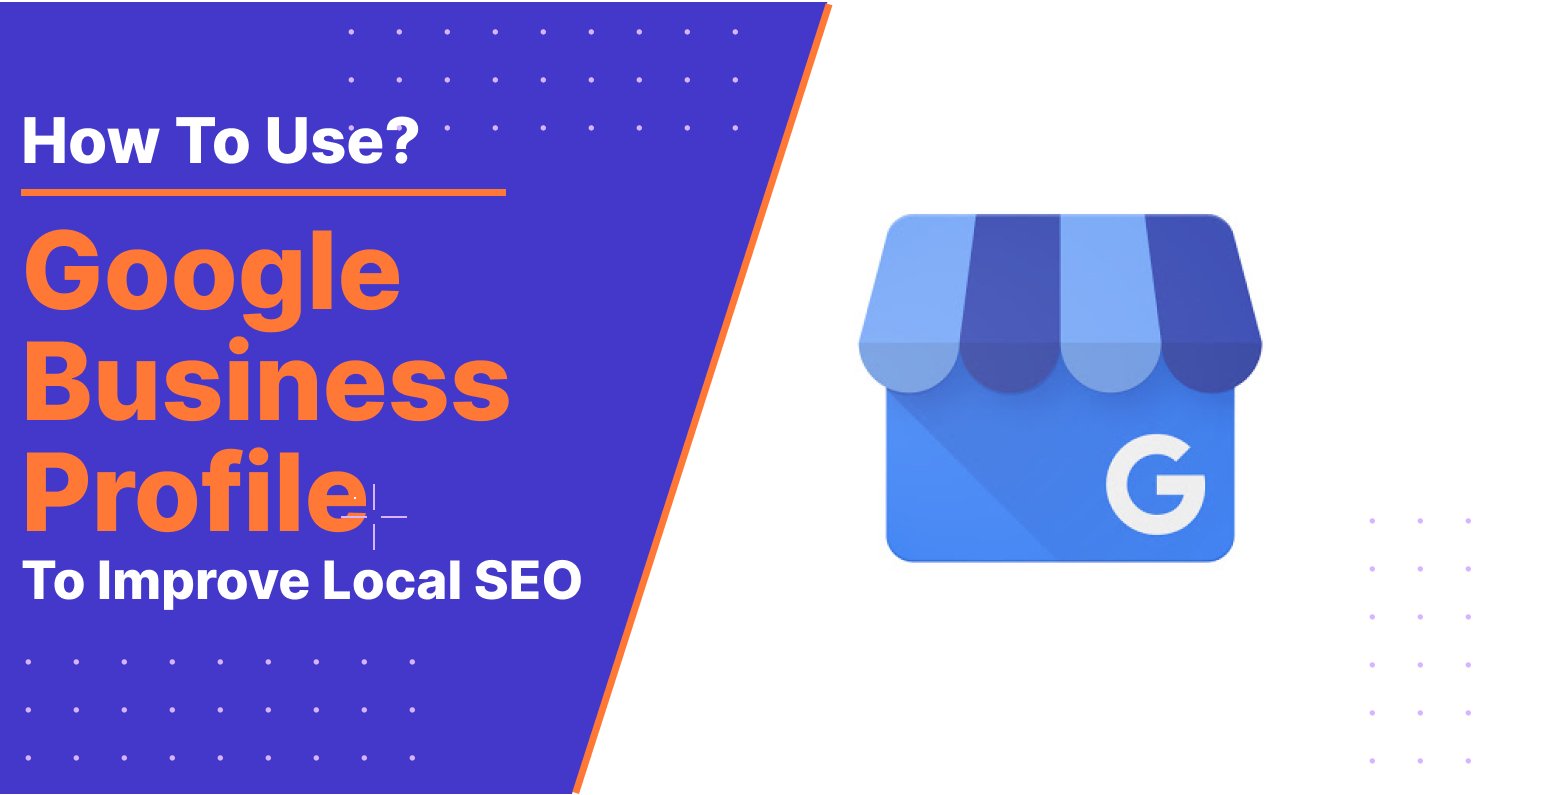 How to use GBP to increase SEO